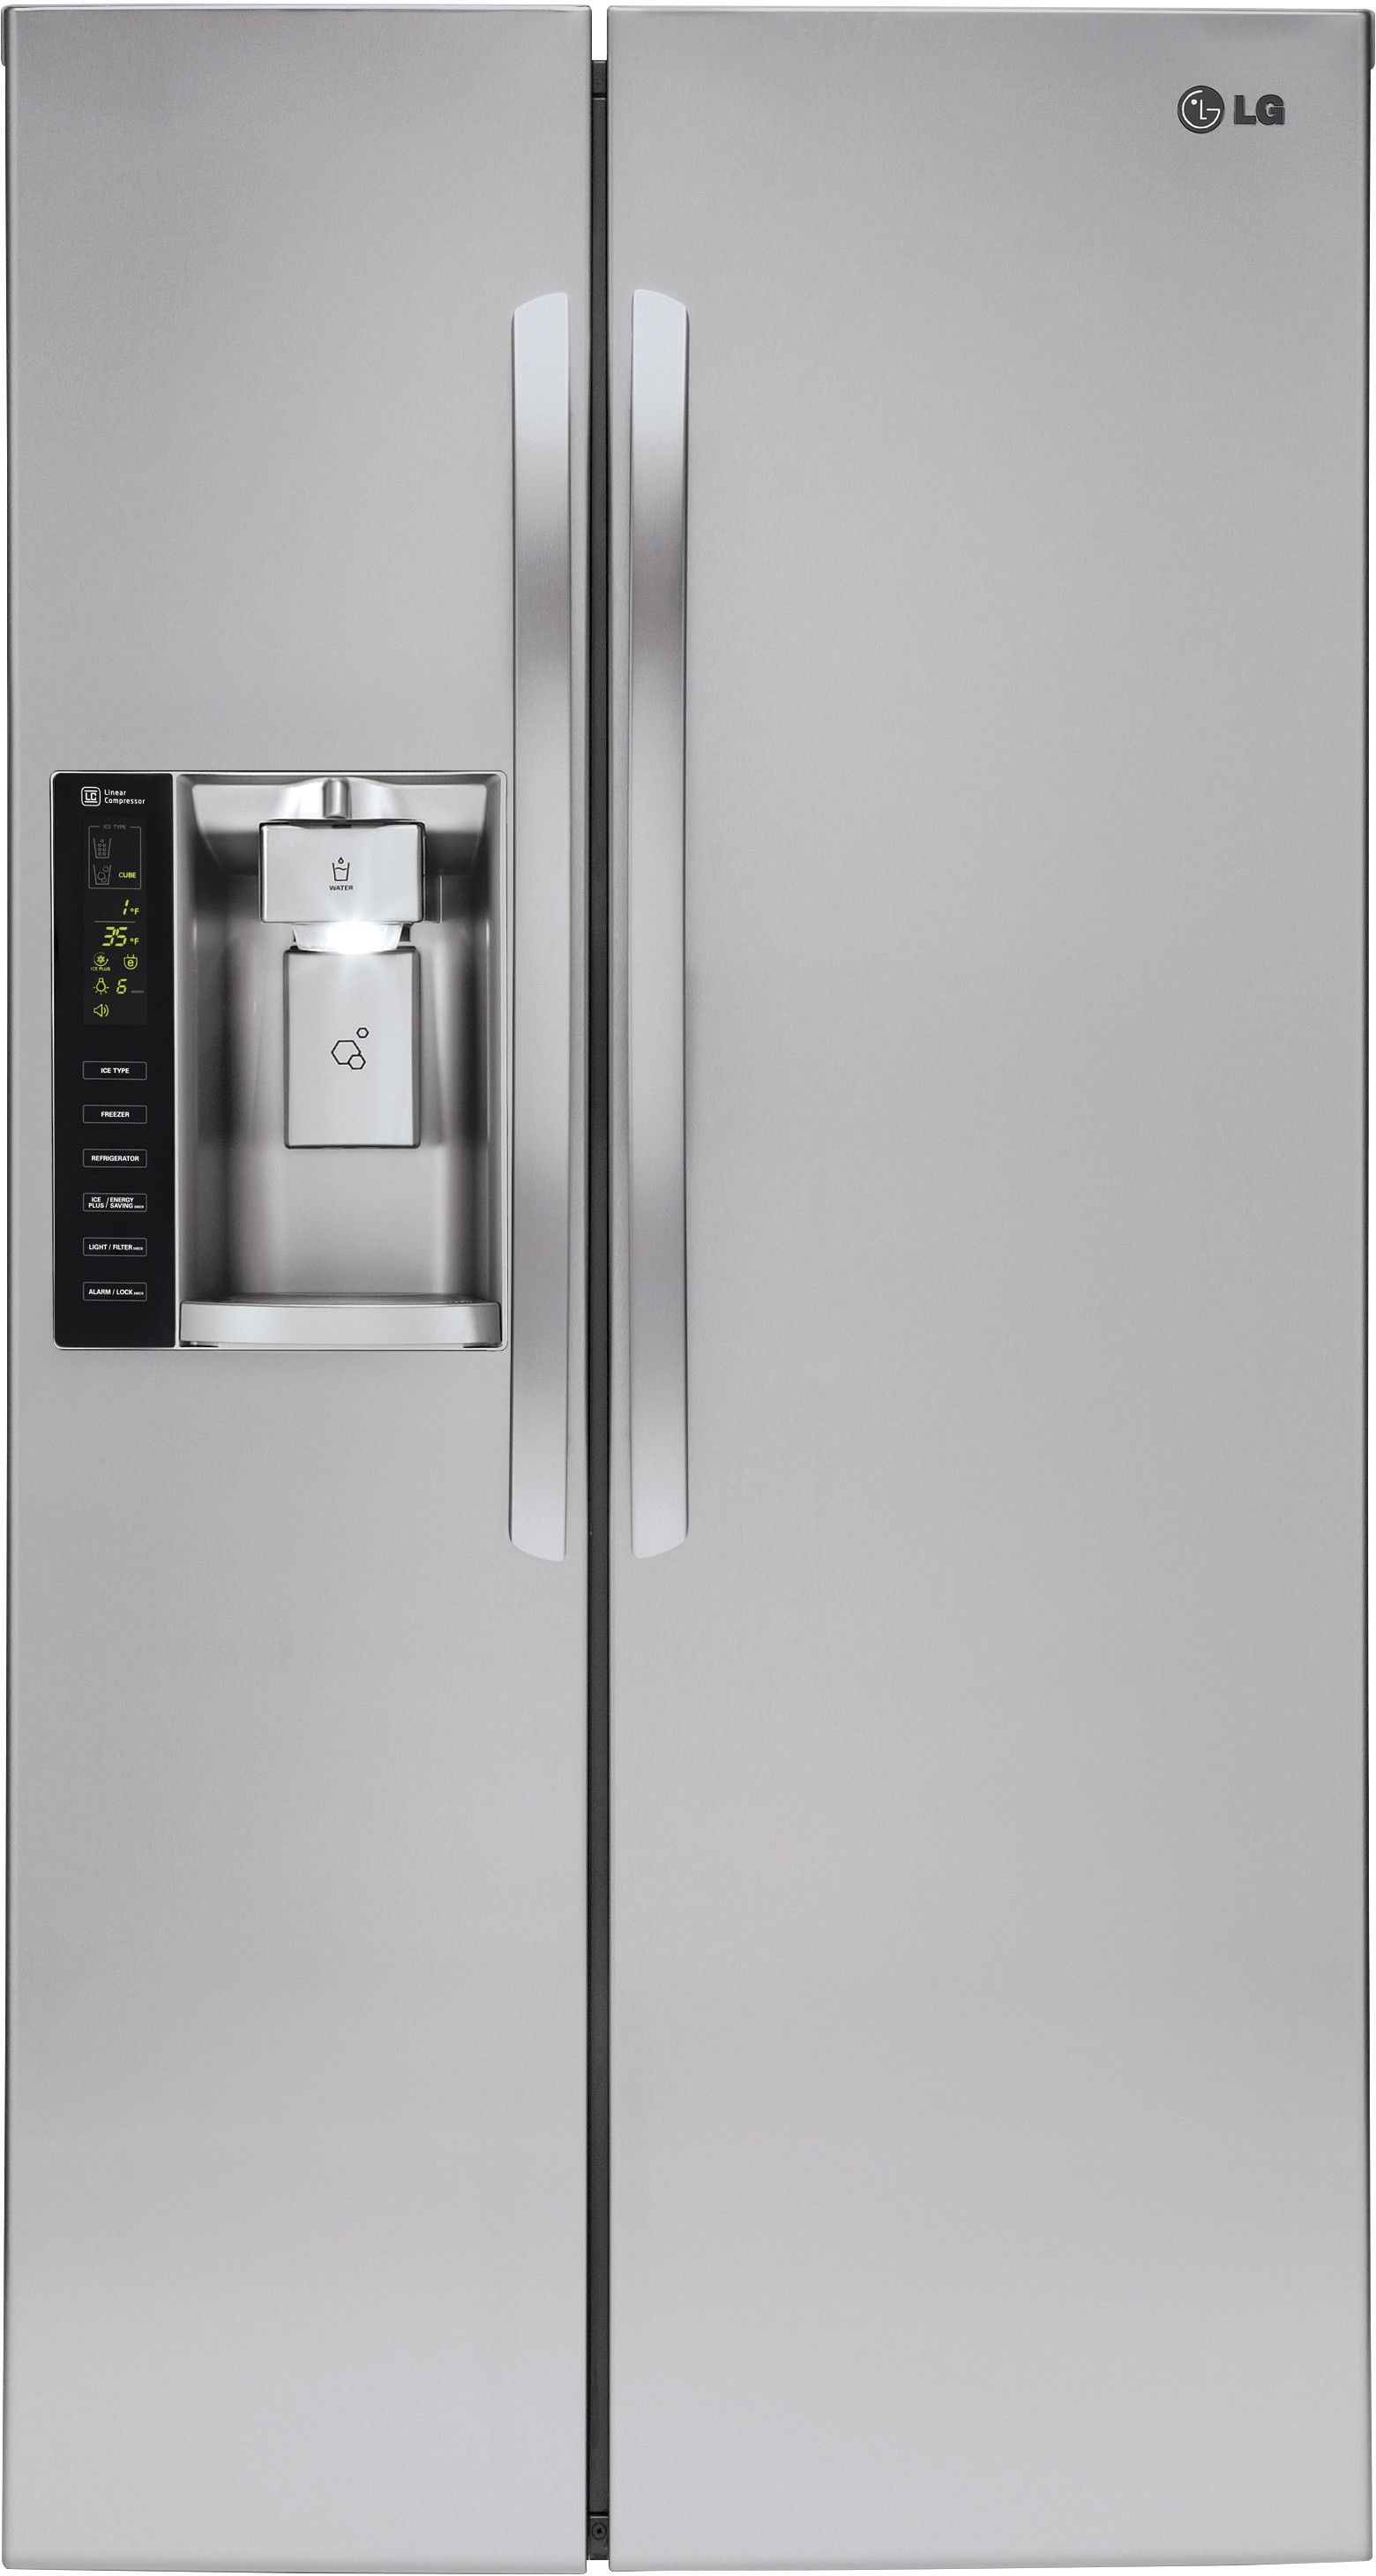 LG 21.9 Cu. Ft. Stainless Steel Counter Depth Side-by-Side Refrigerator